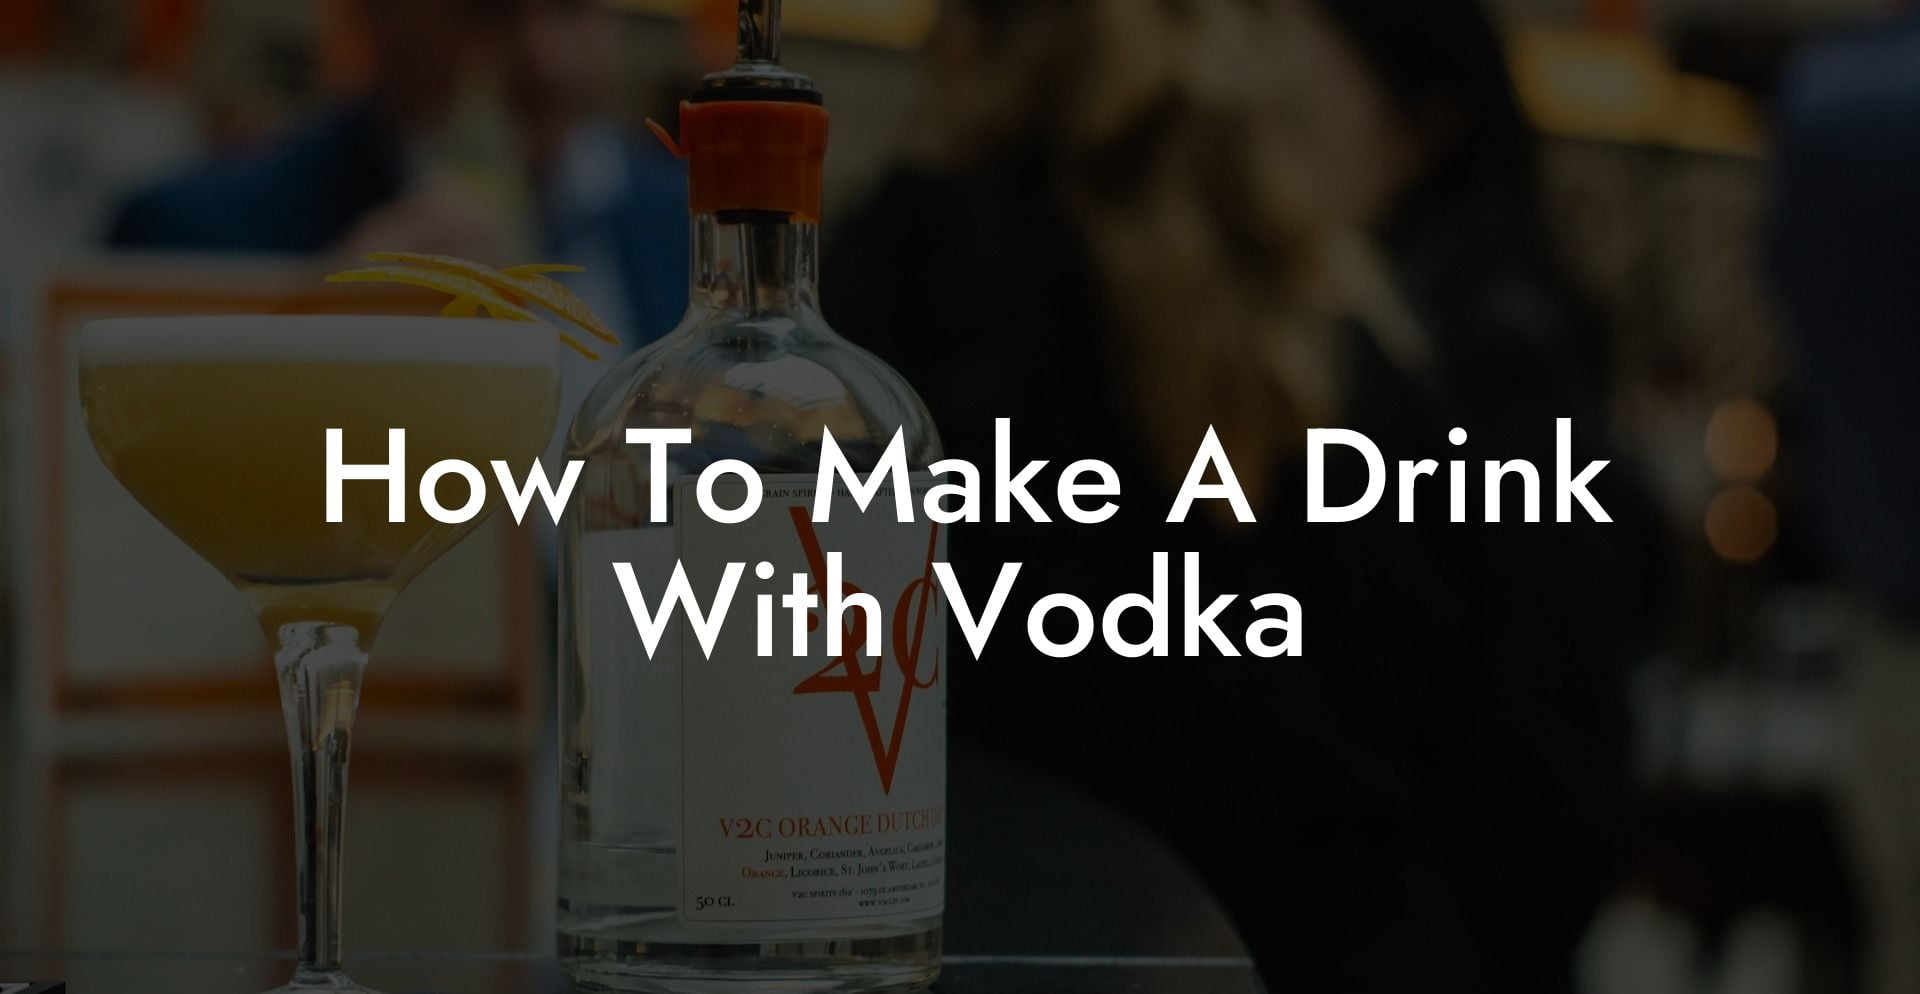 How To Make A Drink With Vodka